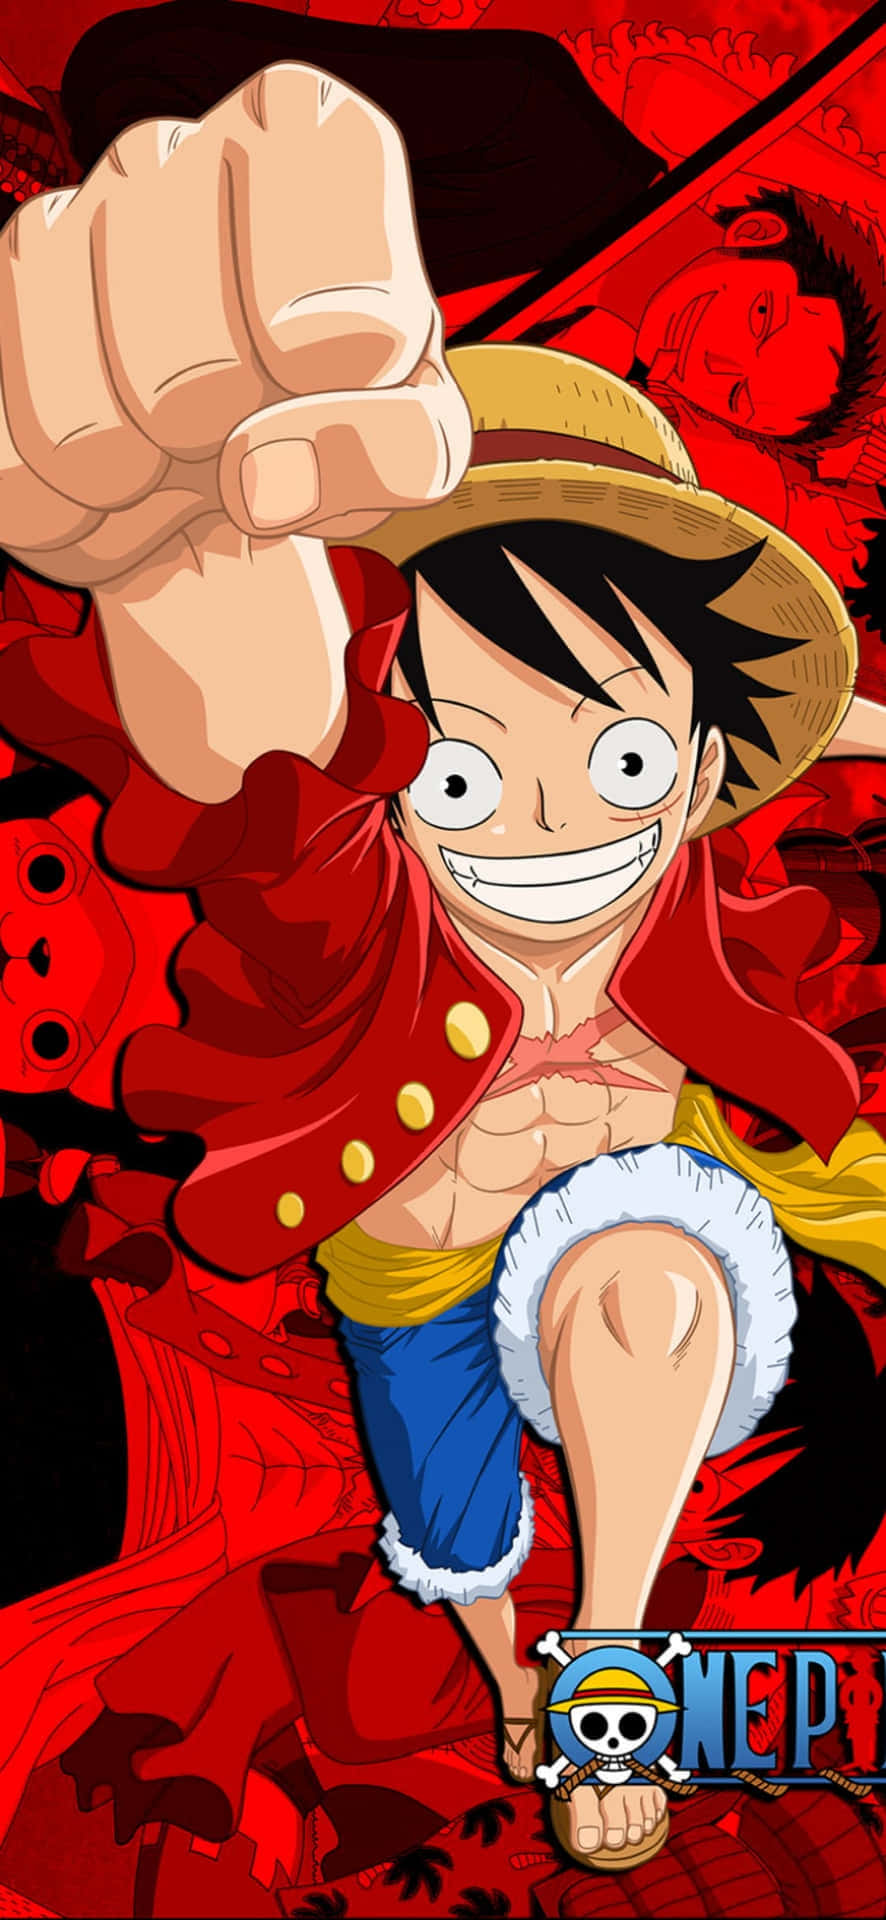 Free One Piece Iphone Wallpaper Downloads, [200+] One Piece Iphone  Wallpapers for FREE 